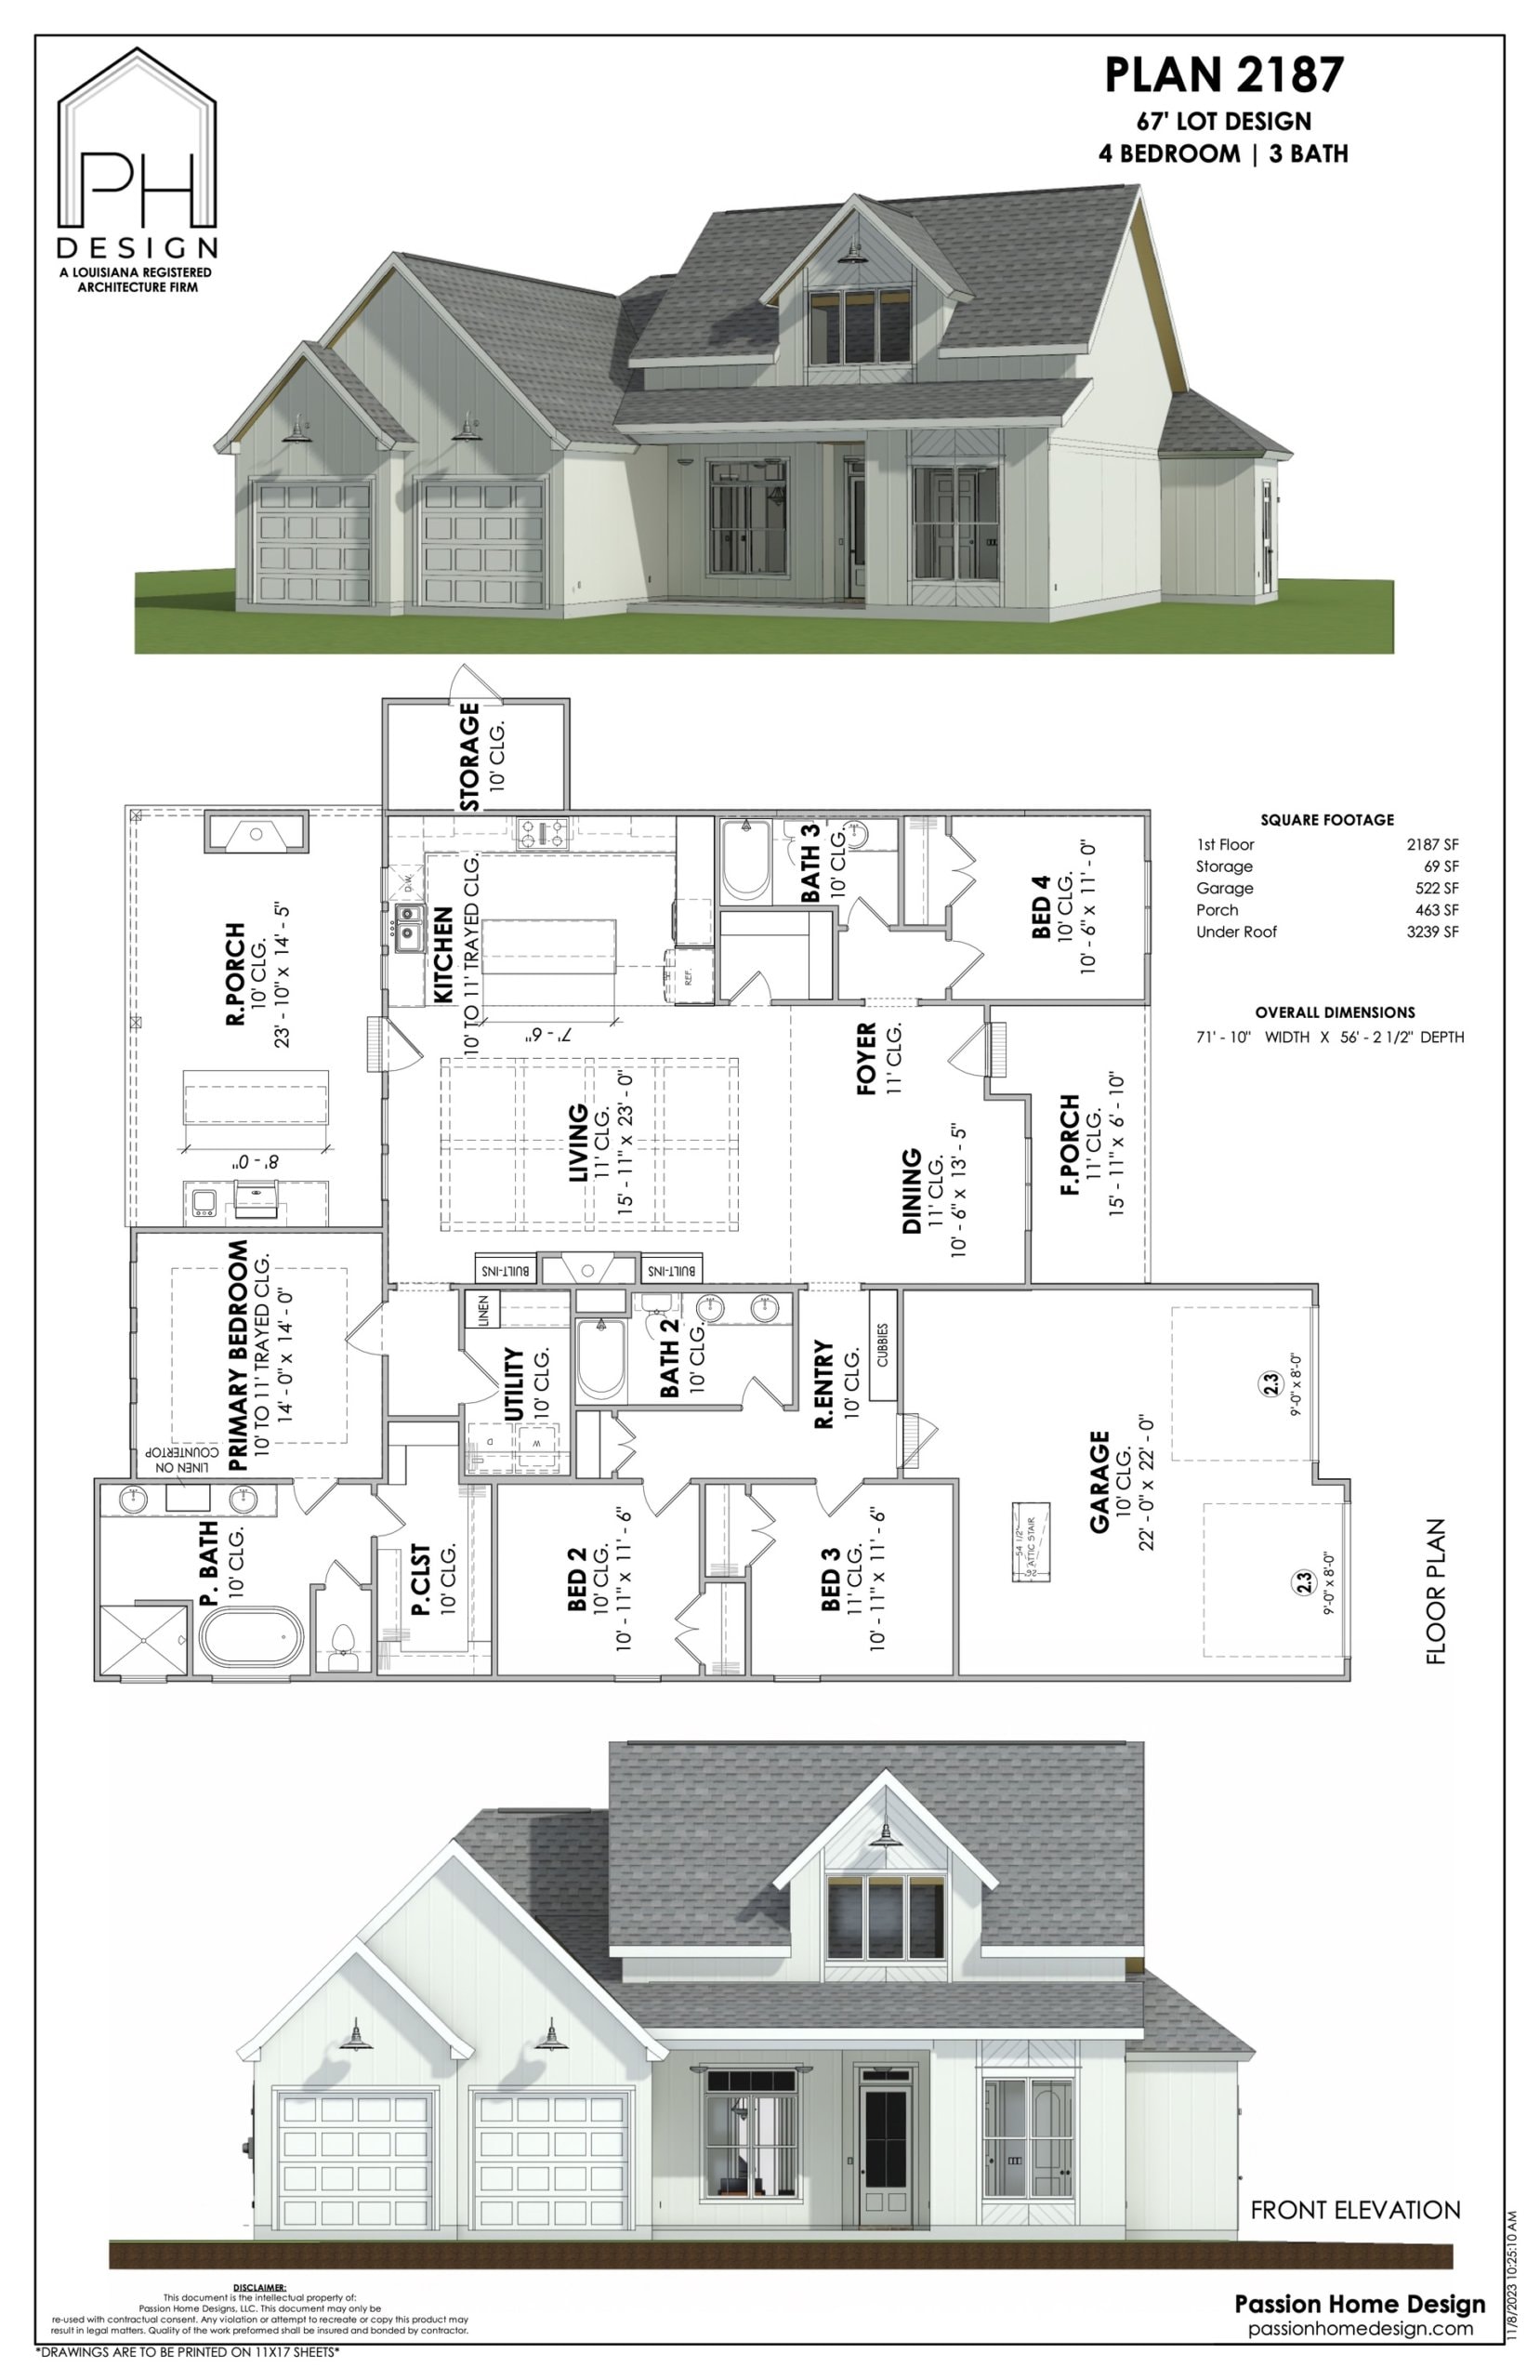 a house plan with a garage and a two car garage.